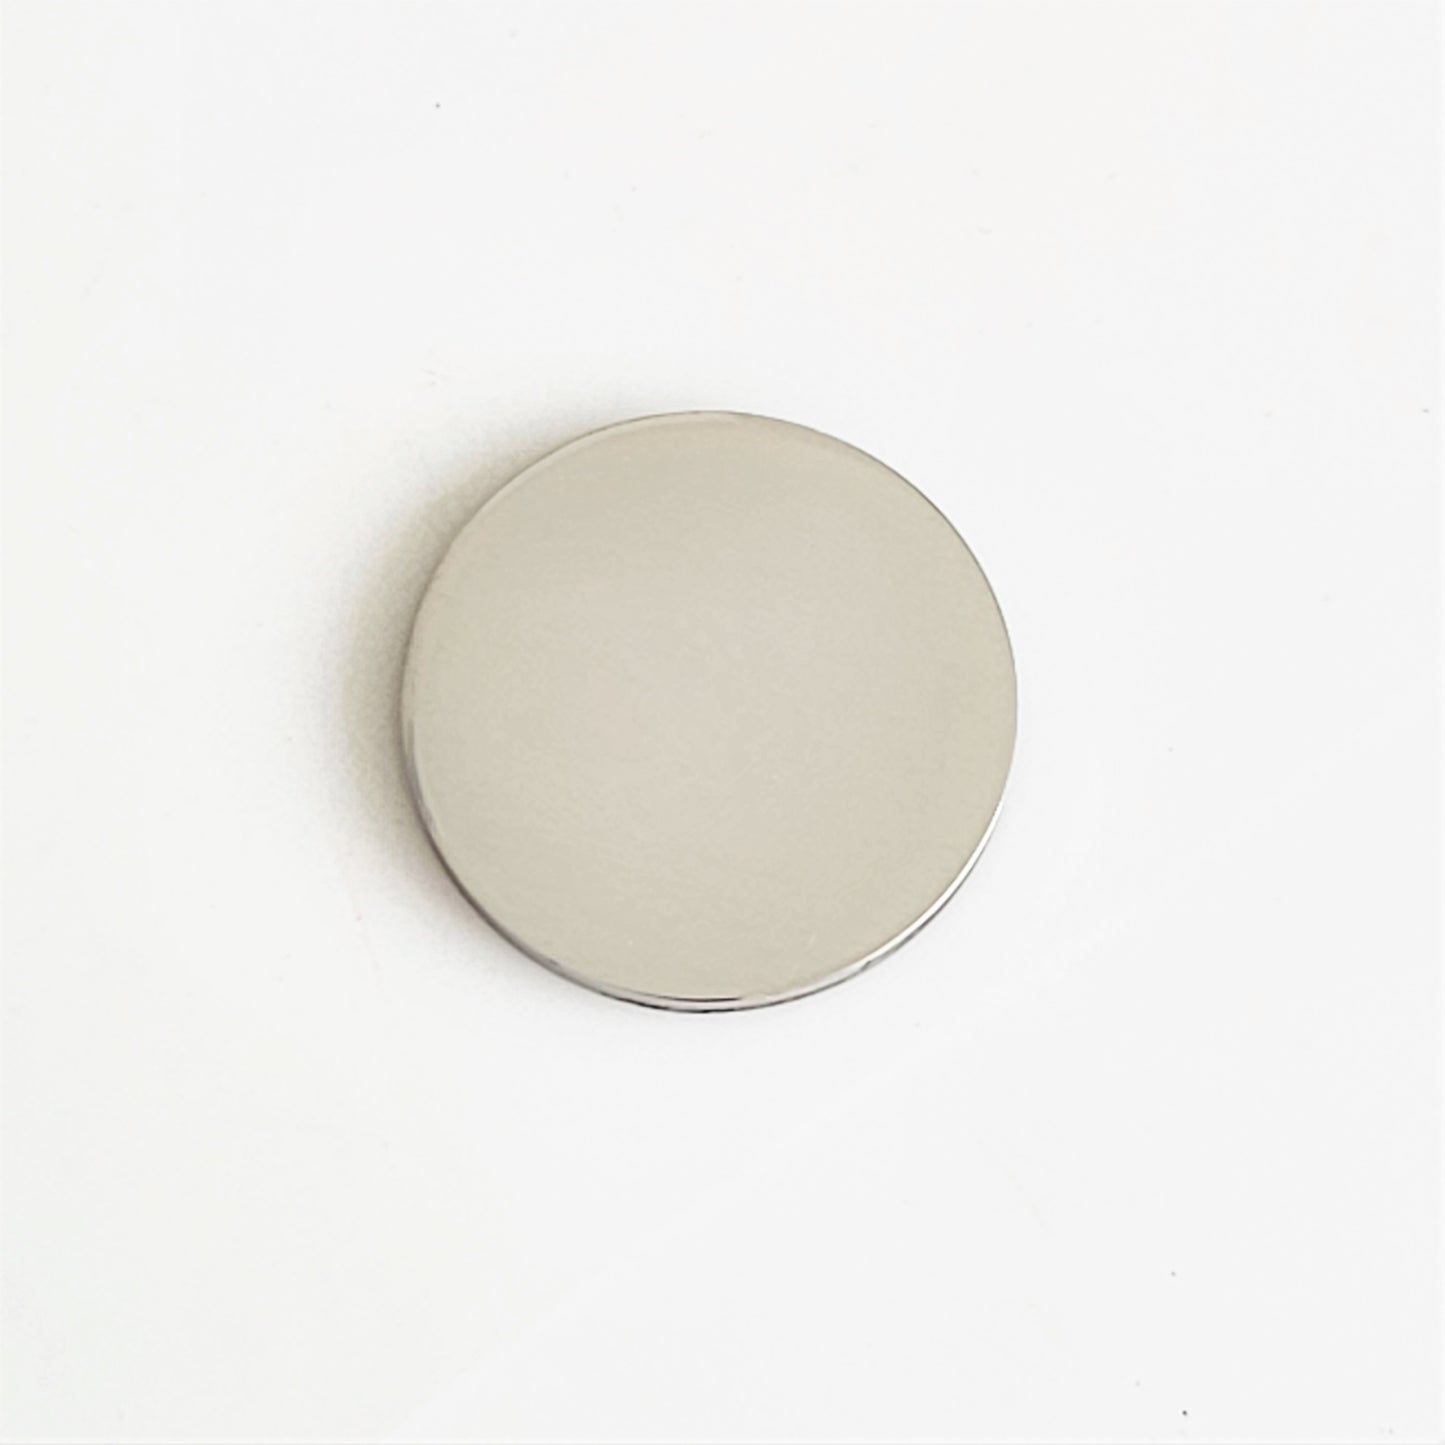 Stainless Steel - 5/8" Circle (no hole)